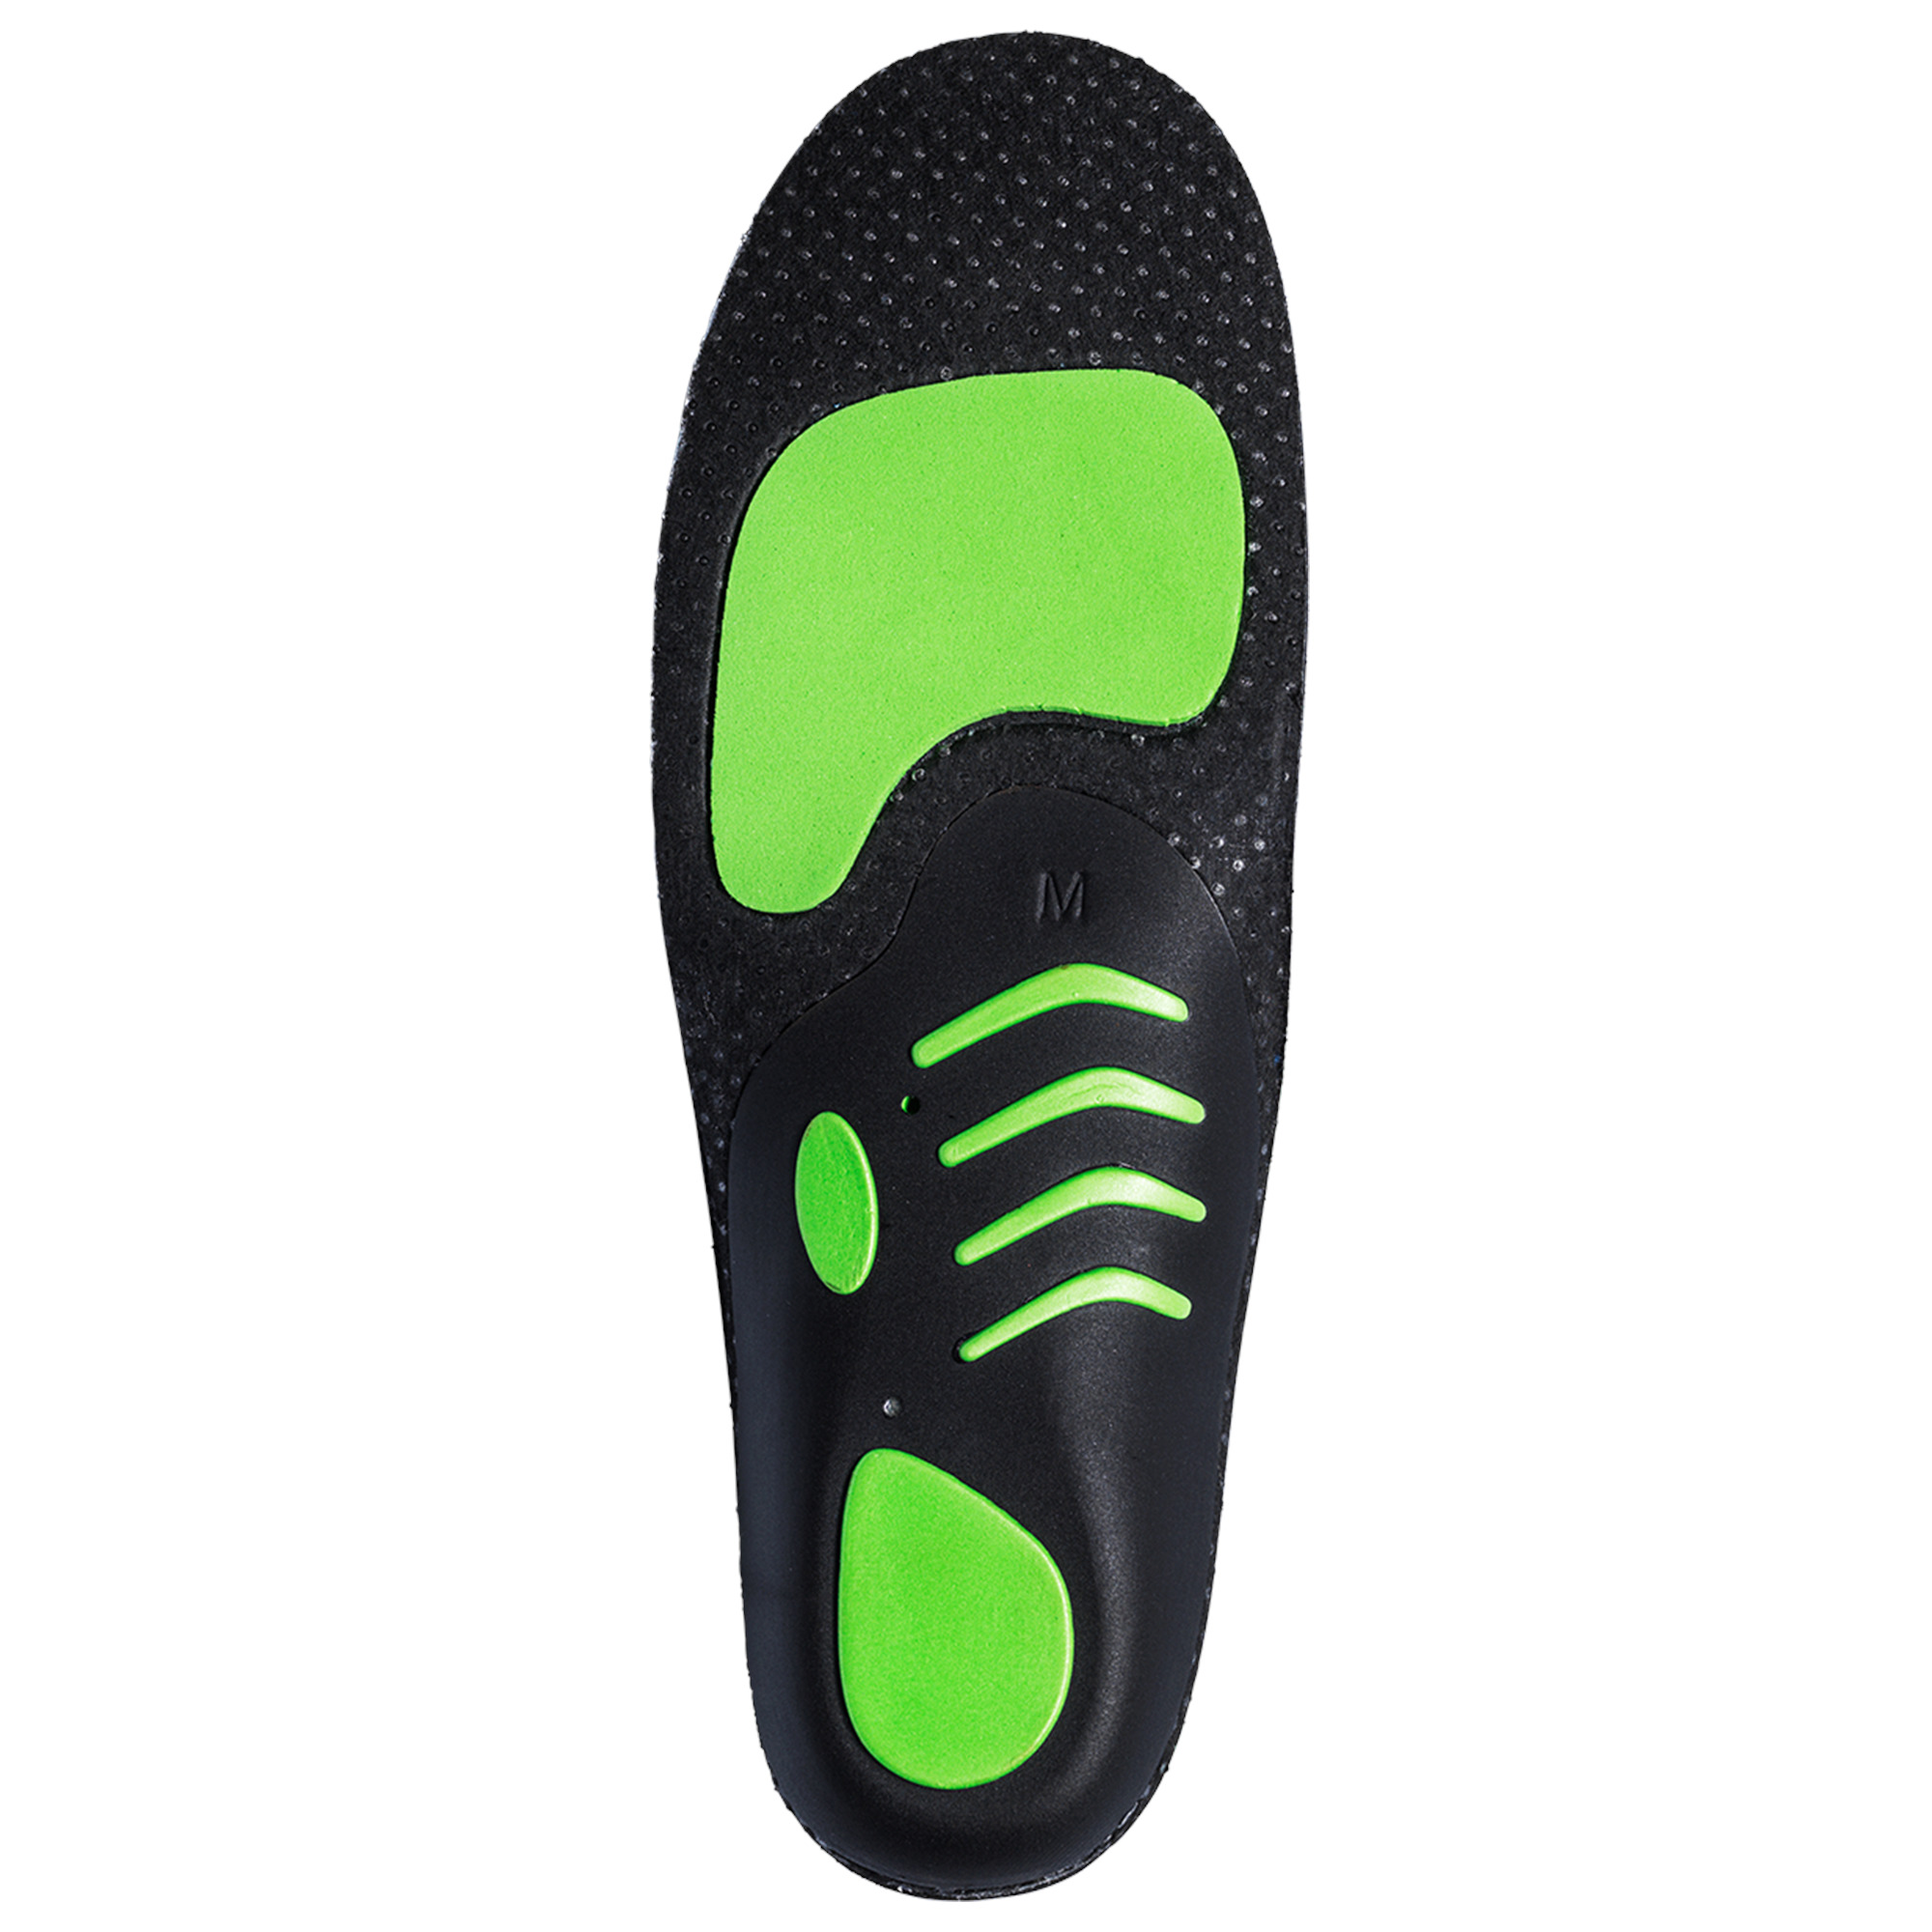 STABILITY Low Arch insoles